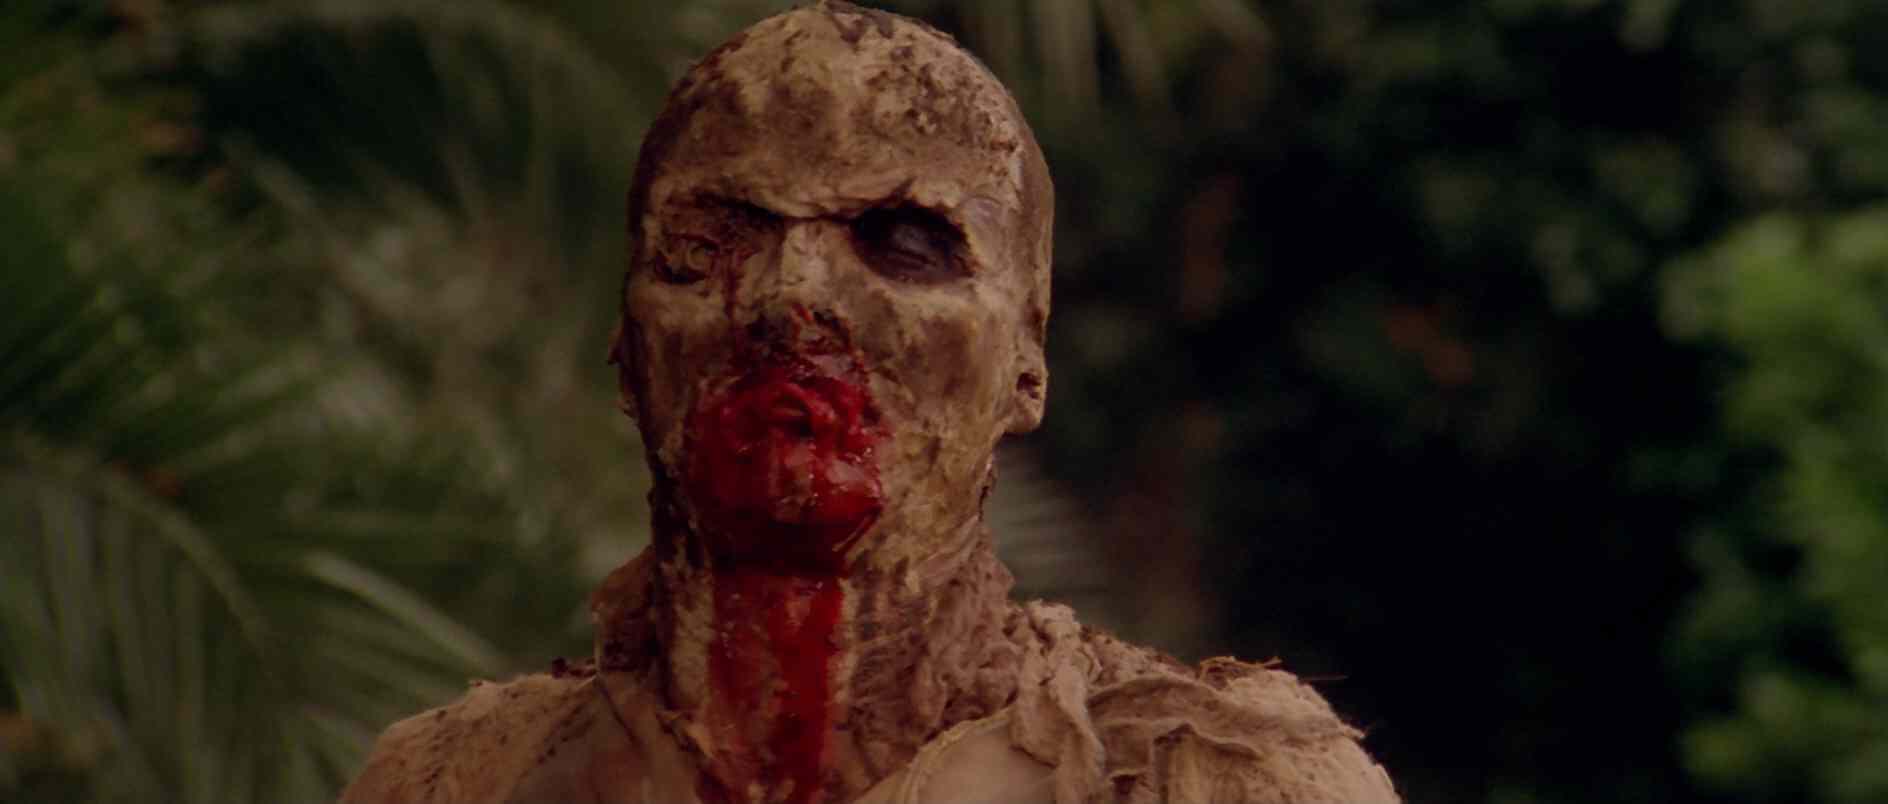 Lucio Fulci's zombies were much more visually disgusting than any before.